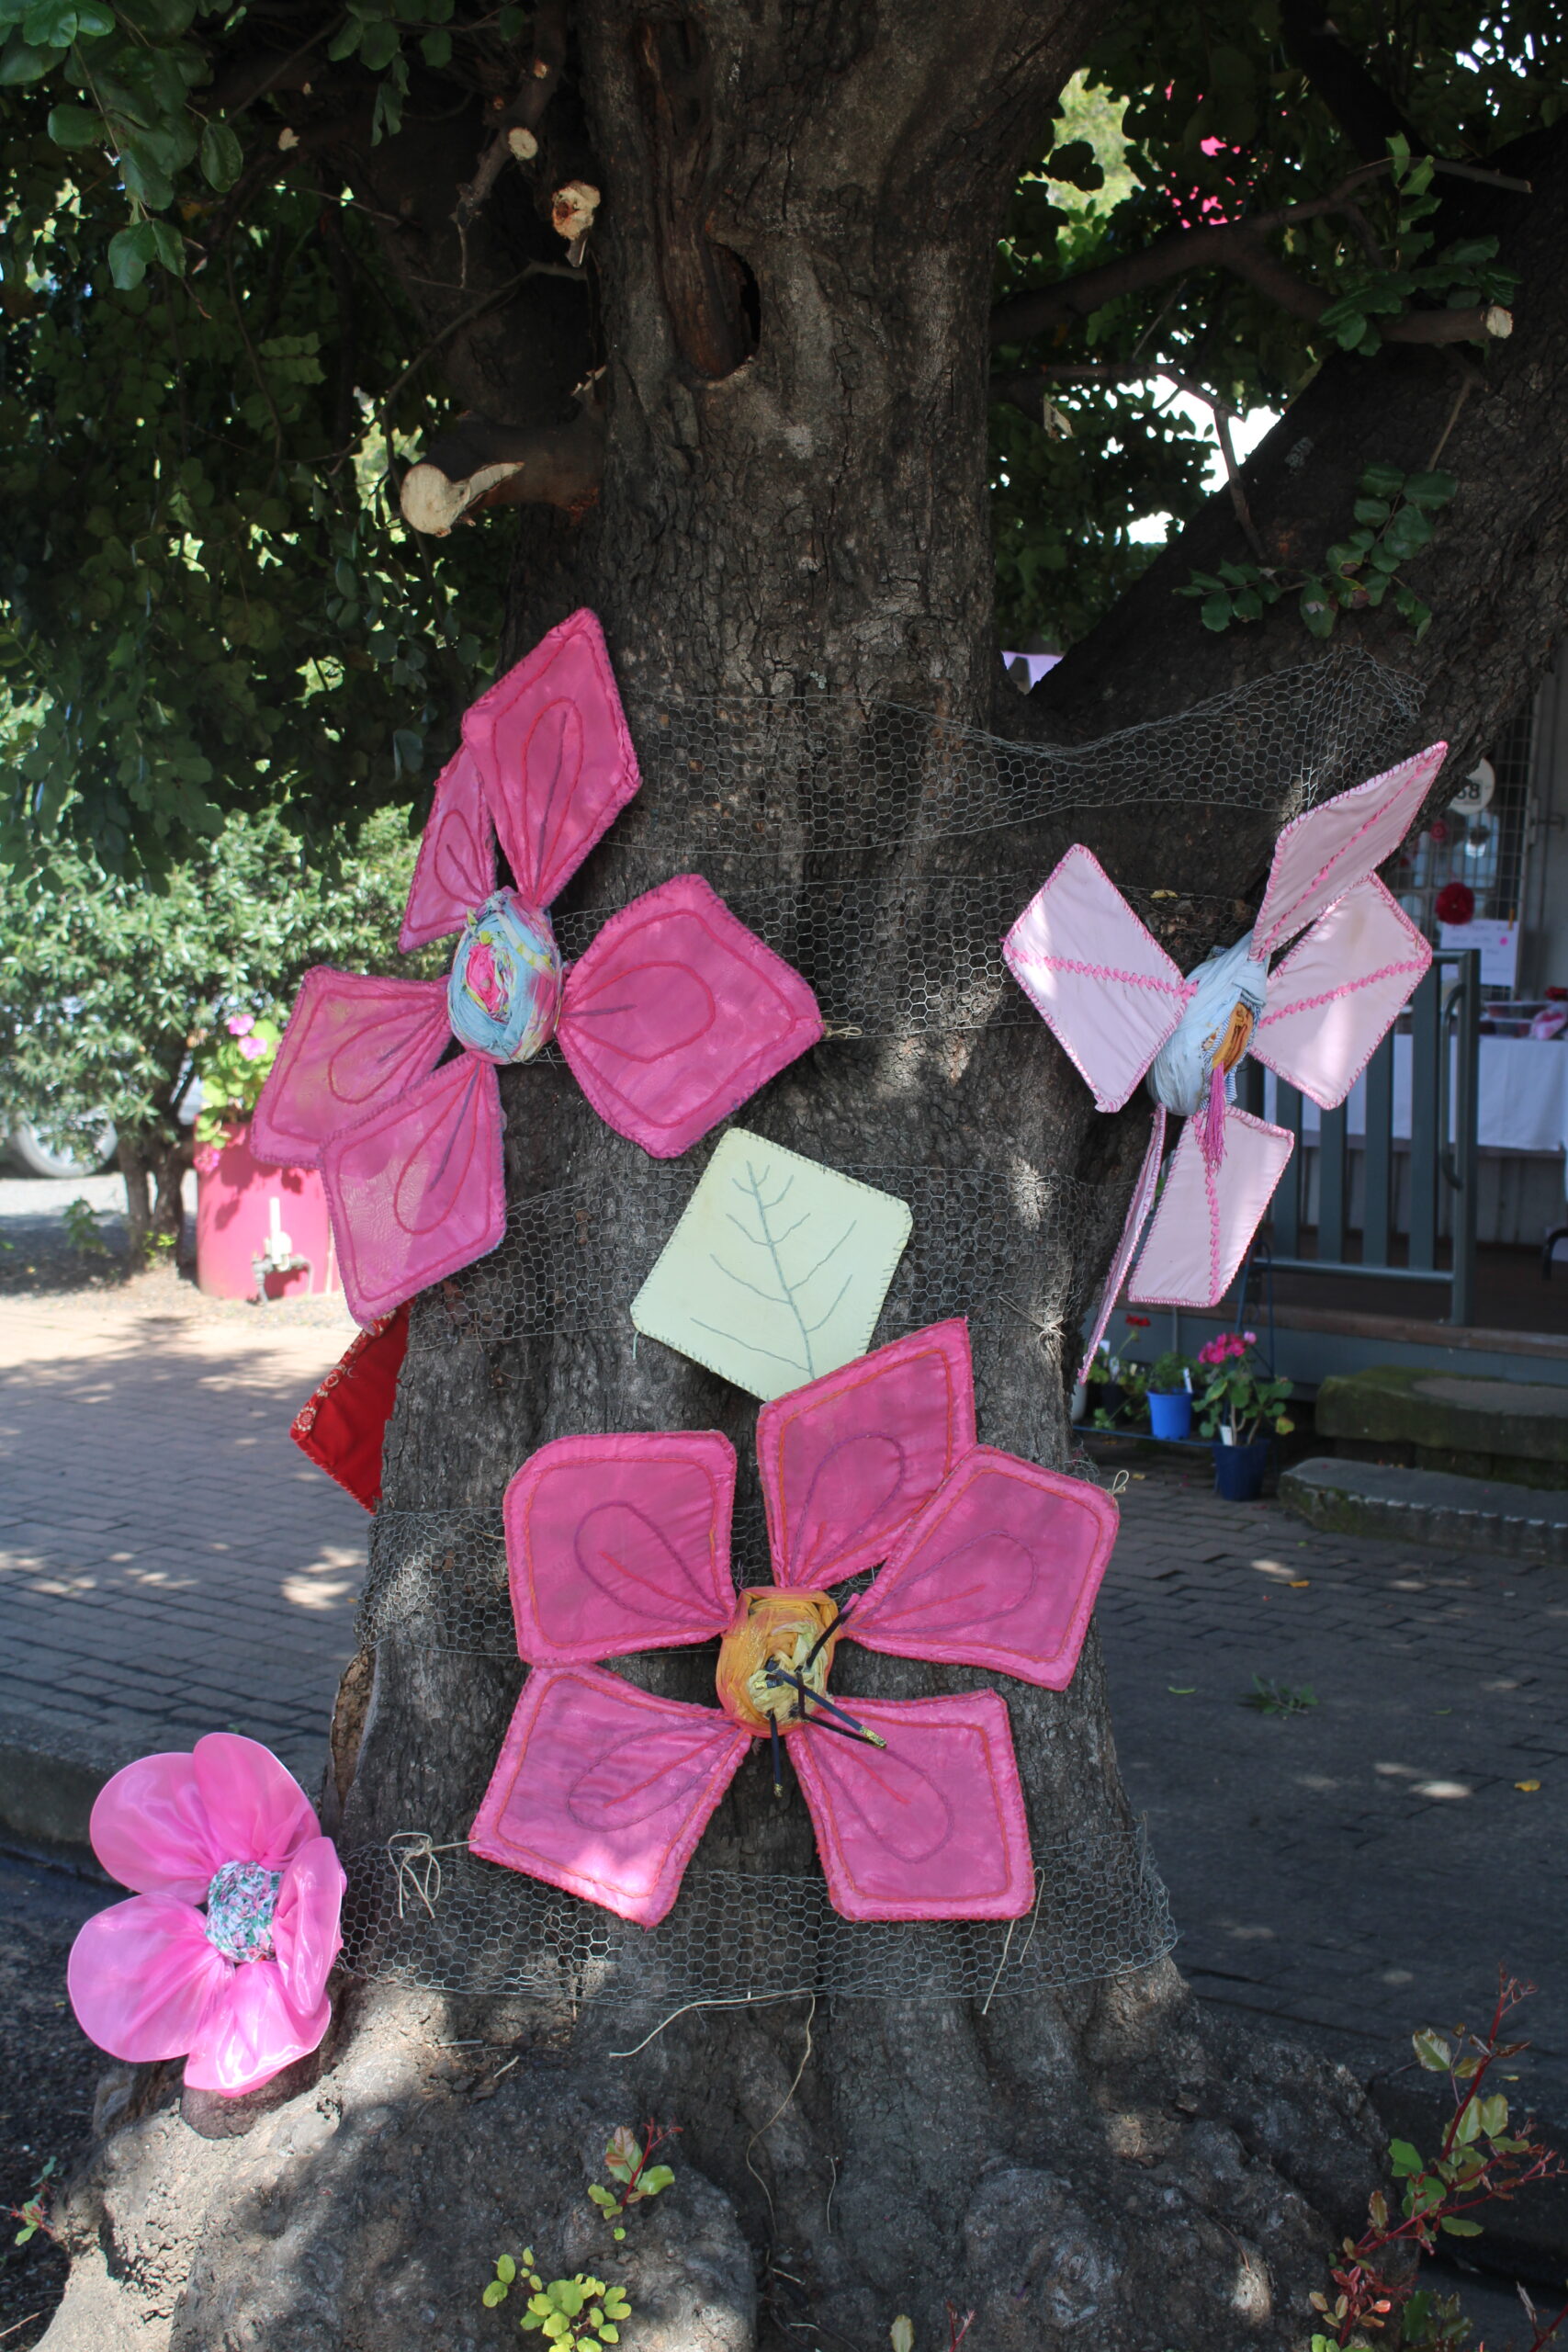 The Narrabri Art and Craft Shop’s tree adorned with pink flowers.